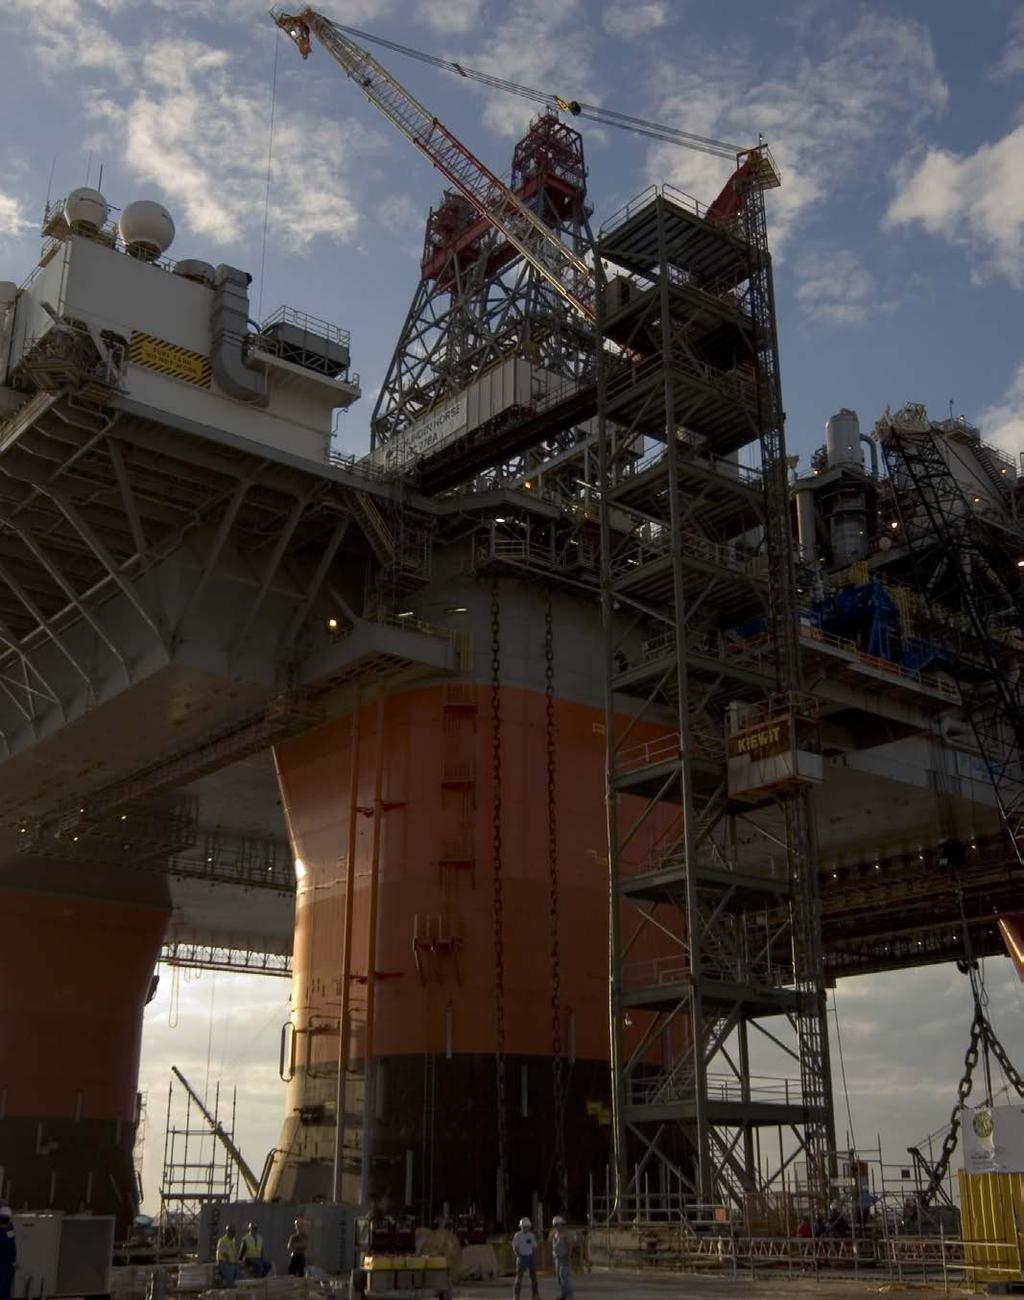 Fully integrated, co-located topsides, hulls and subsea teams result in improved risk